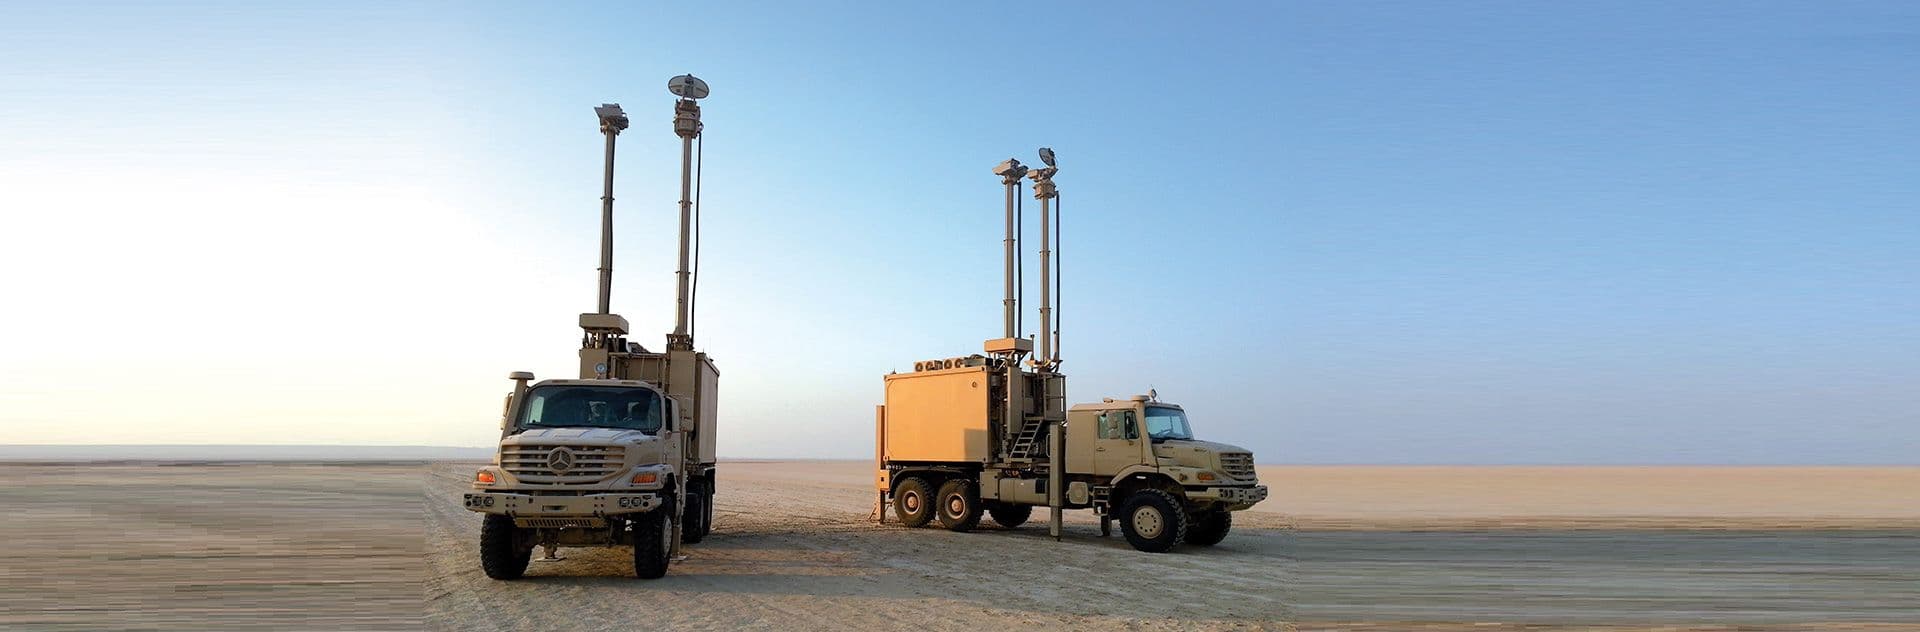 Multi-Sensors Surveillance Vehicles, easy to deploy and equipped with sensors to rapidly secure fields of operation